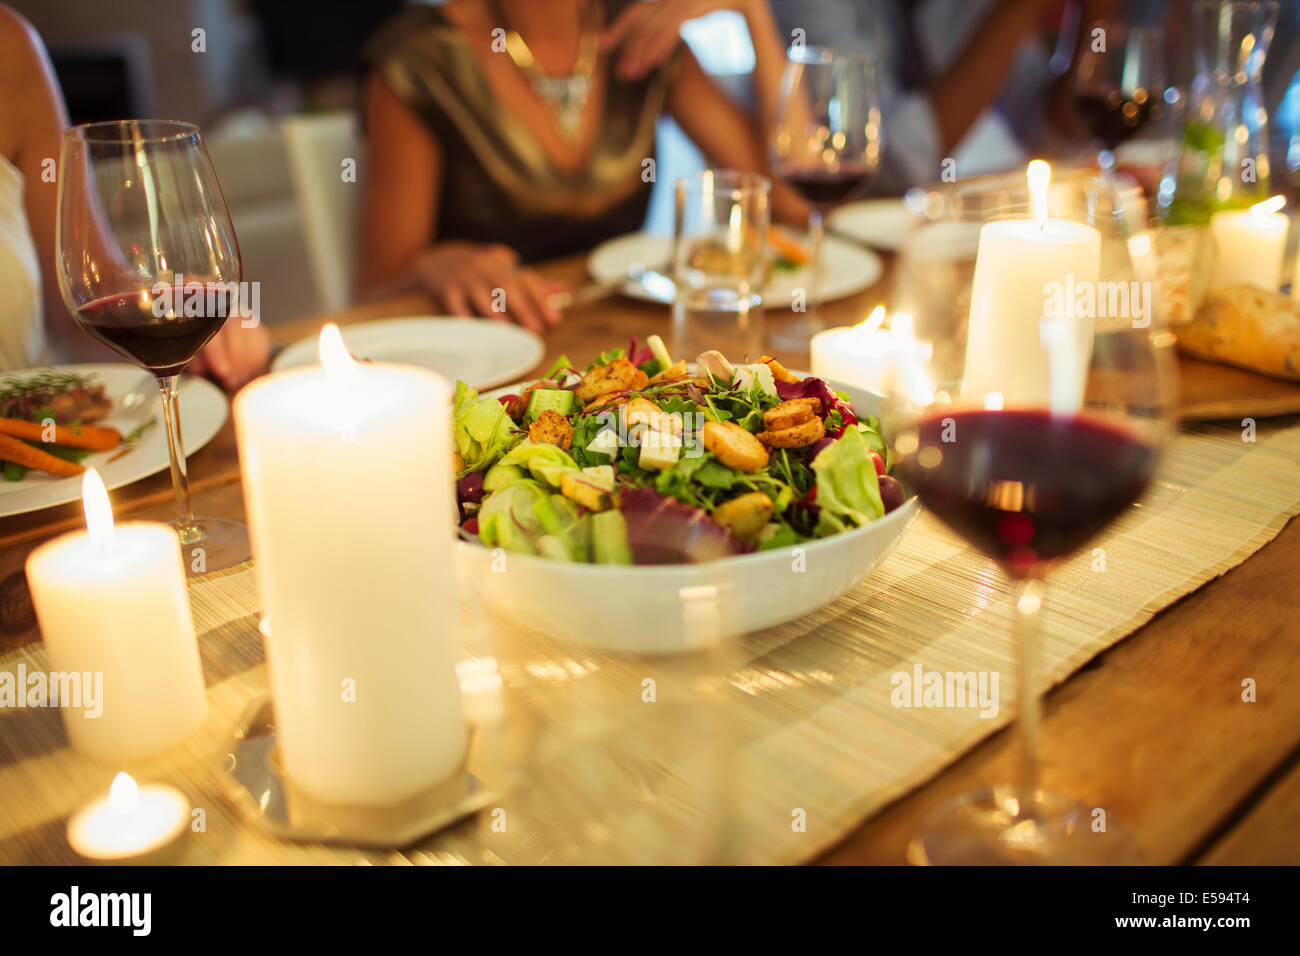 Salad bowl on table at dinner party Stock Photo